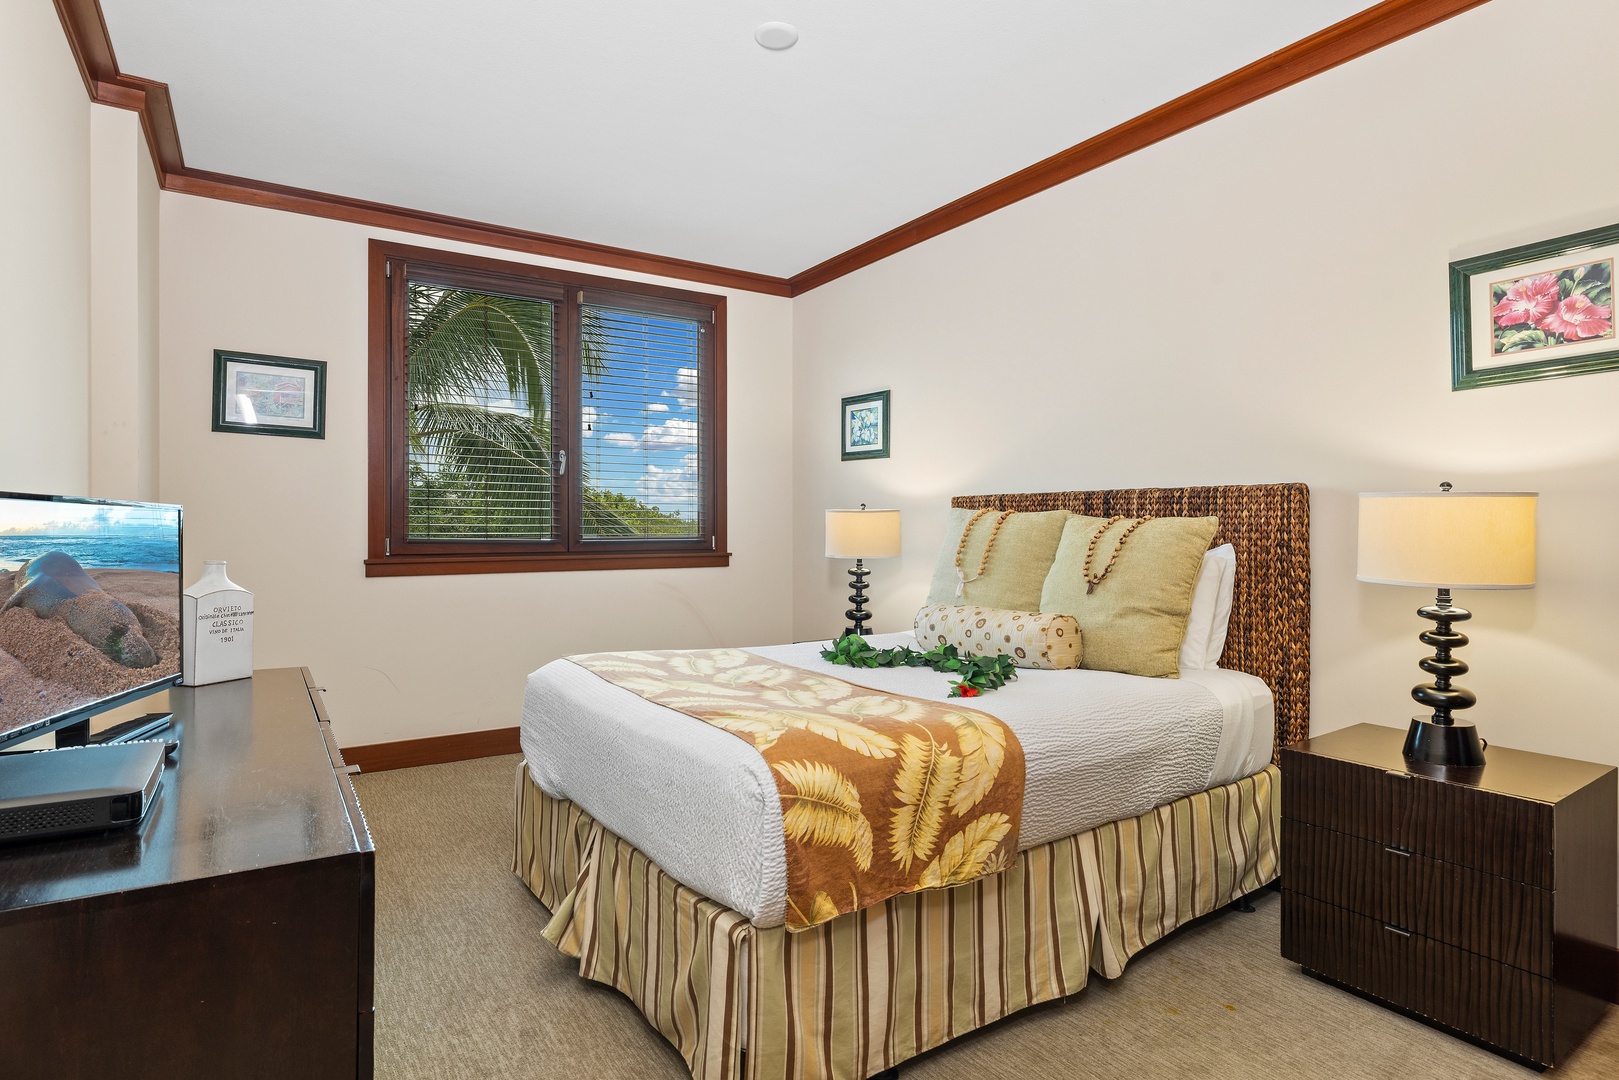 Kapolei Vacation Rentals, Ko Olina Beach Villas O402 - The second guest bedroom with an queen bed in an elegant setting.